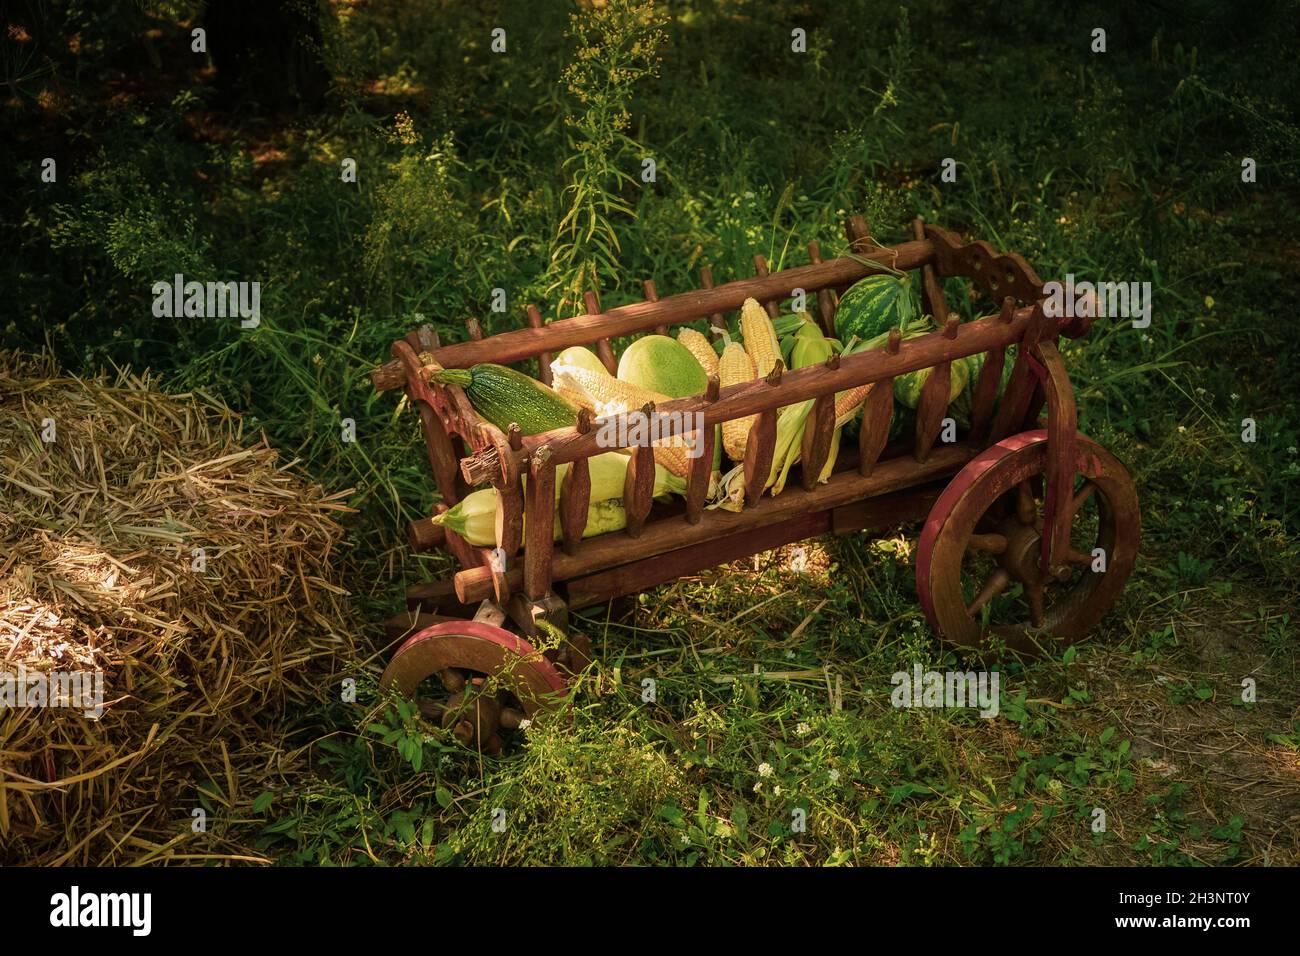 Decorations for harvest festival with a wooden manger with gifts from the fields of corn, watermelon, zucchini standing in the g Stock Photo